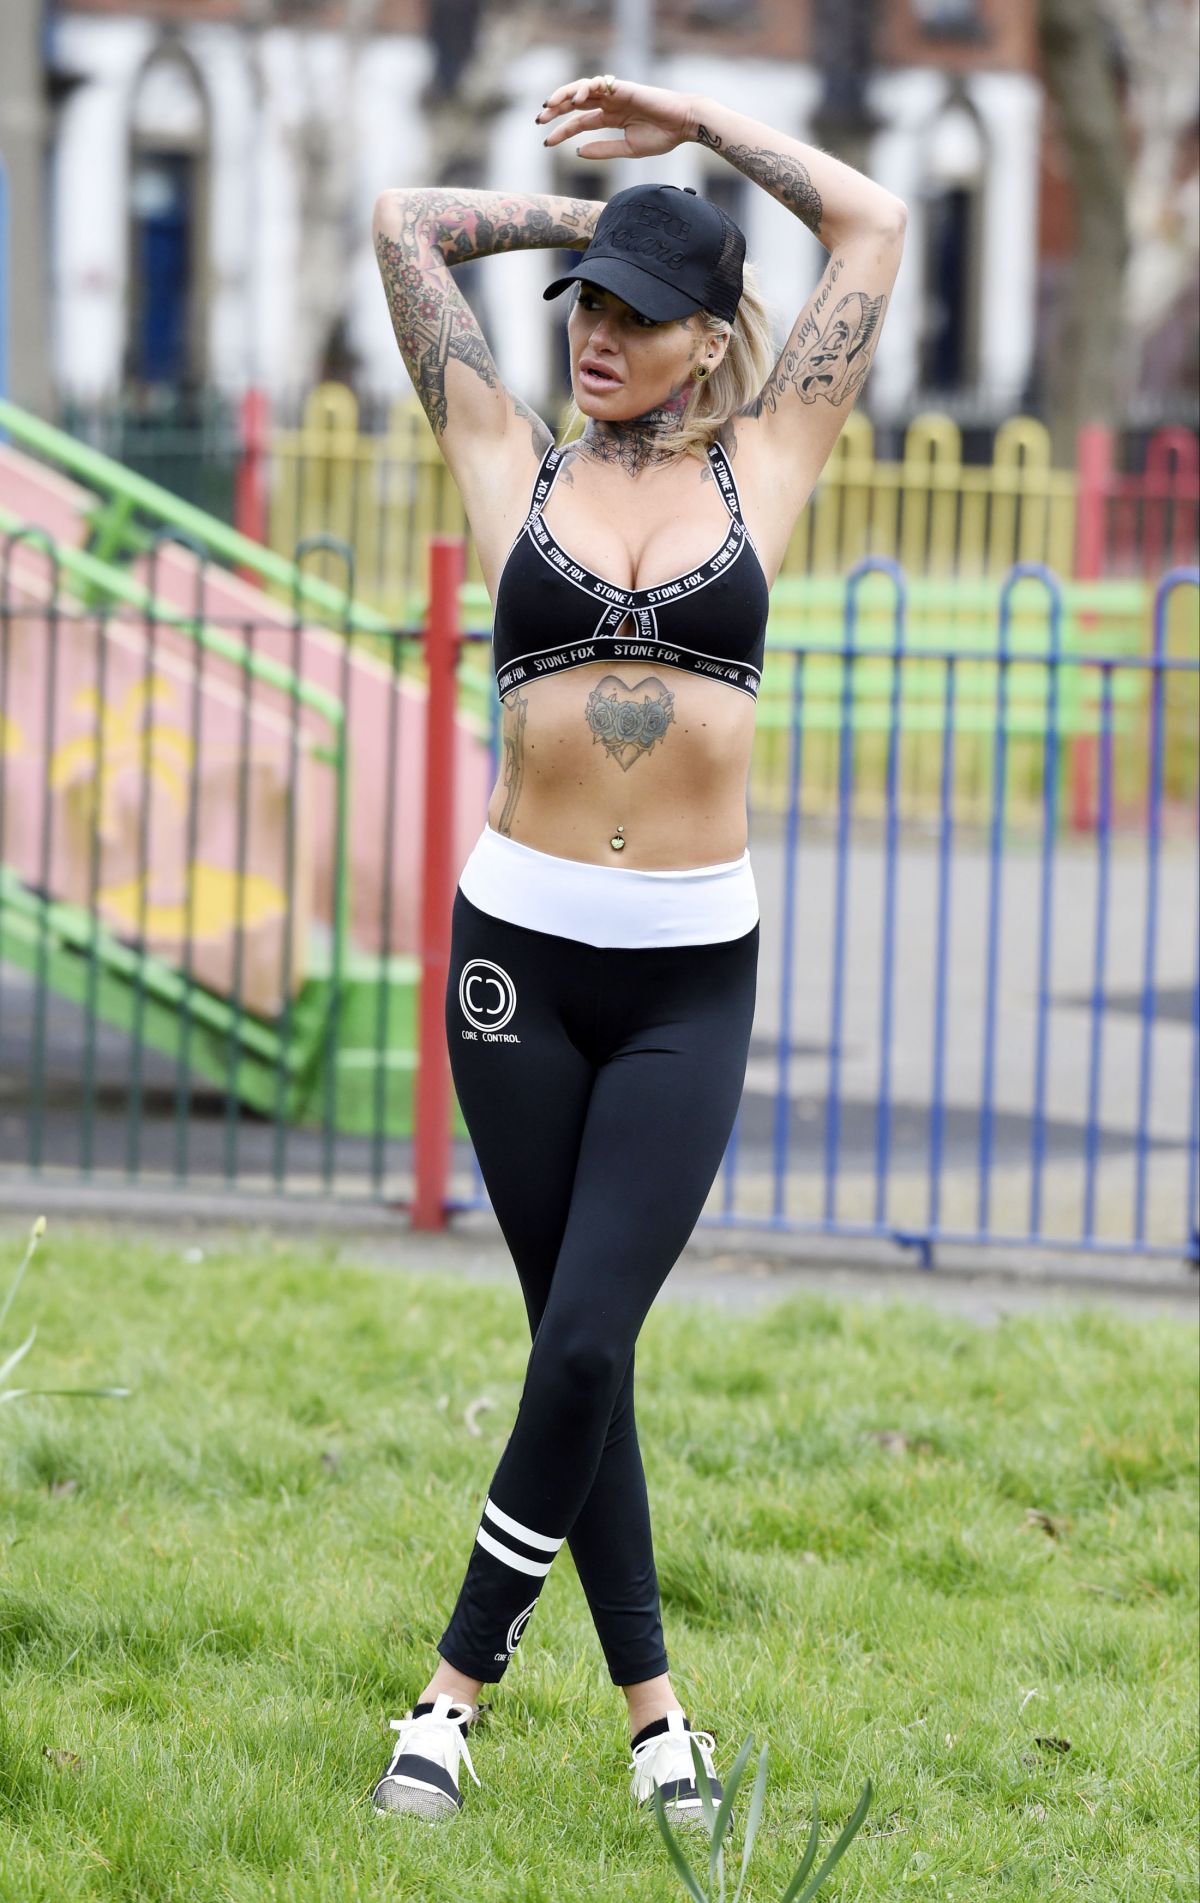 jemma-lucy-working-out-at-a-park-in-manchester-03-28-2016_2.jpg